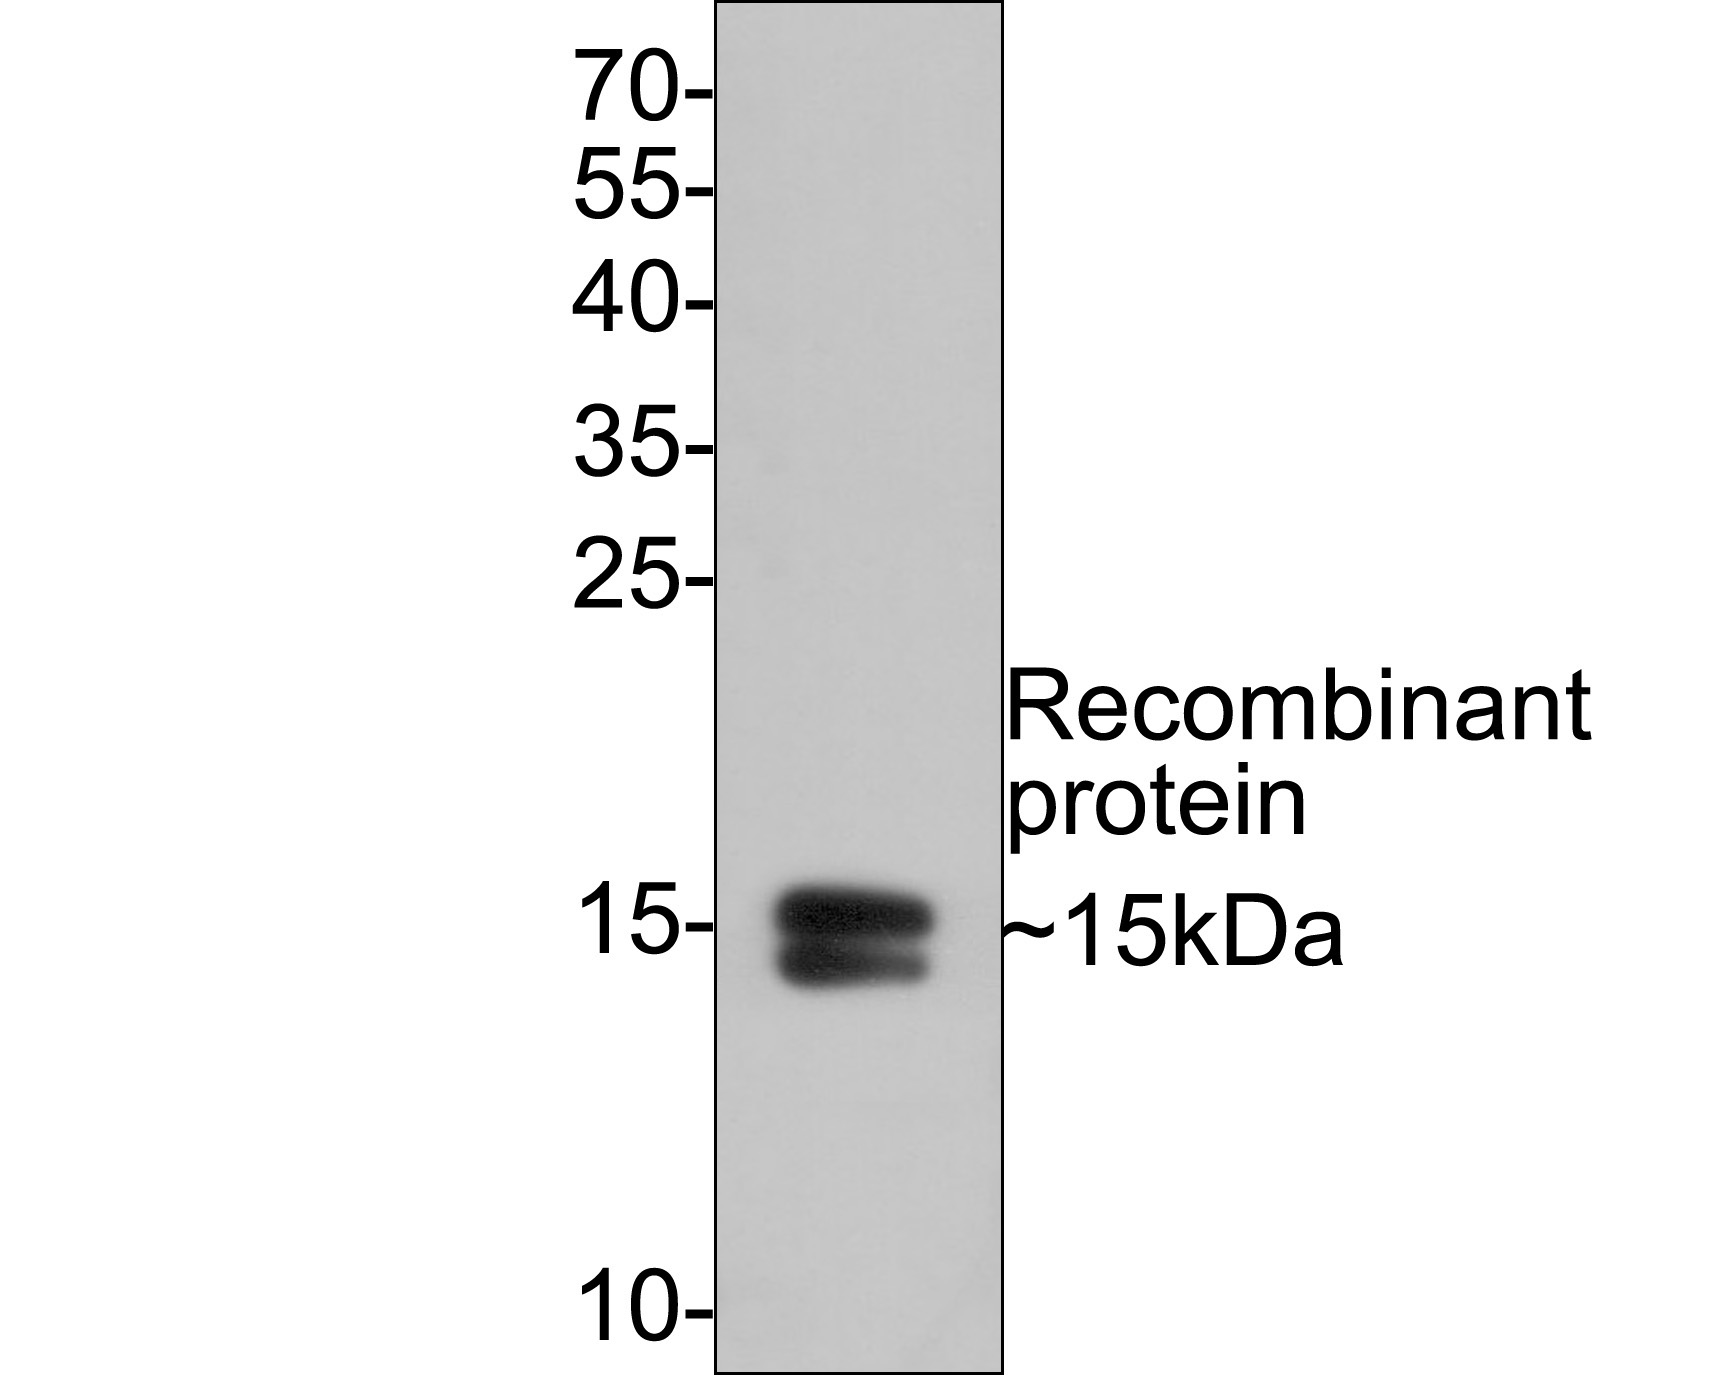 Western blot analysis of IL-2 on IL-2 recombinant protein with Mouse anti-IL-2 antibody (HA601016) at 1/500 dilution.<br />
<br />
Lysates/proteins at 50 ng/Lane.<br />
<br />
Exposure time: 30 seconds;<br />
<br />
15% SDS-PAGE gel.<br />
<br />
Proteins were transferred to a PVDF membrane and blocked with 5% NFDM/TBST for 1 hour at room temperature. The primary antibody (HA601016) at 1/500 dilution was used in 5% NFDM/TBST at room temperature for 2 hours. Goat Anti-Mouse IgG - HRP Secondary Antibody (HA1006) at 1:100,000 dilution was used for 1 hour at room temperature.